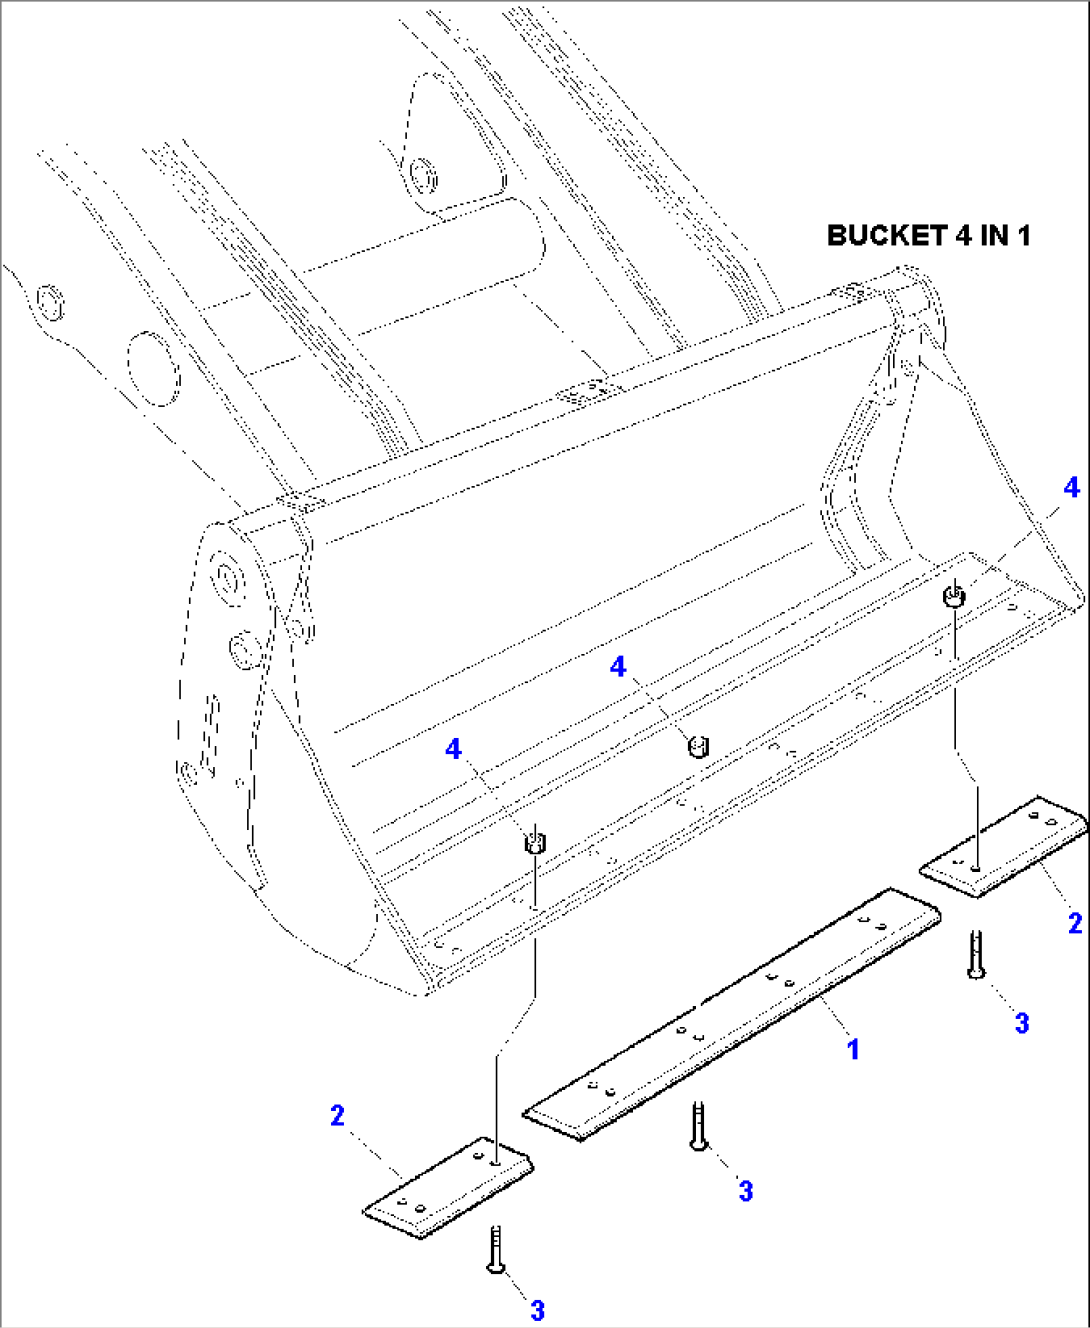 BLADE FOR BUCKET 4 IN 1 (OPTIONAL)